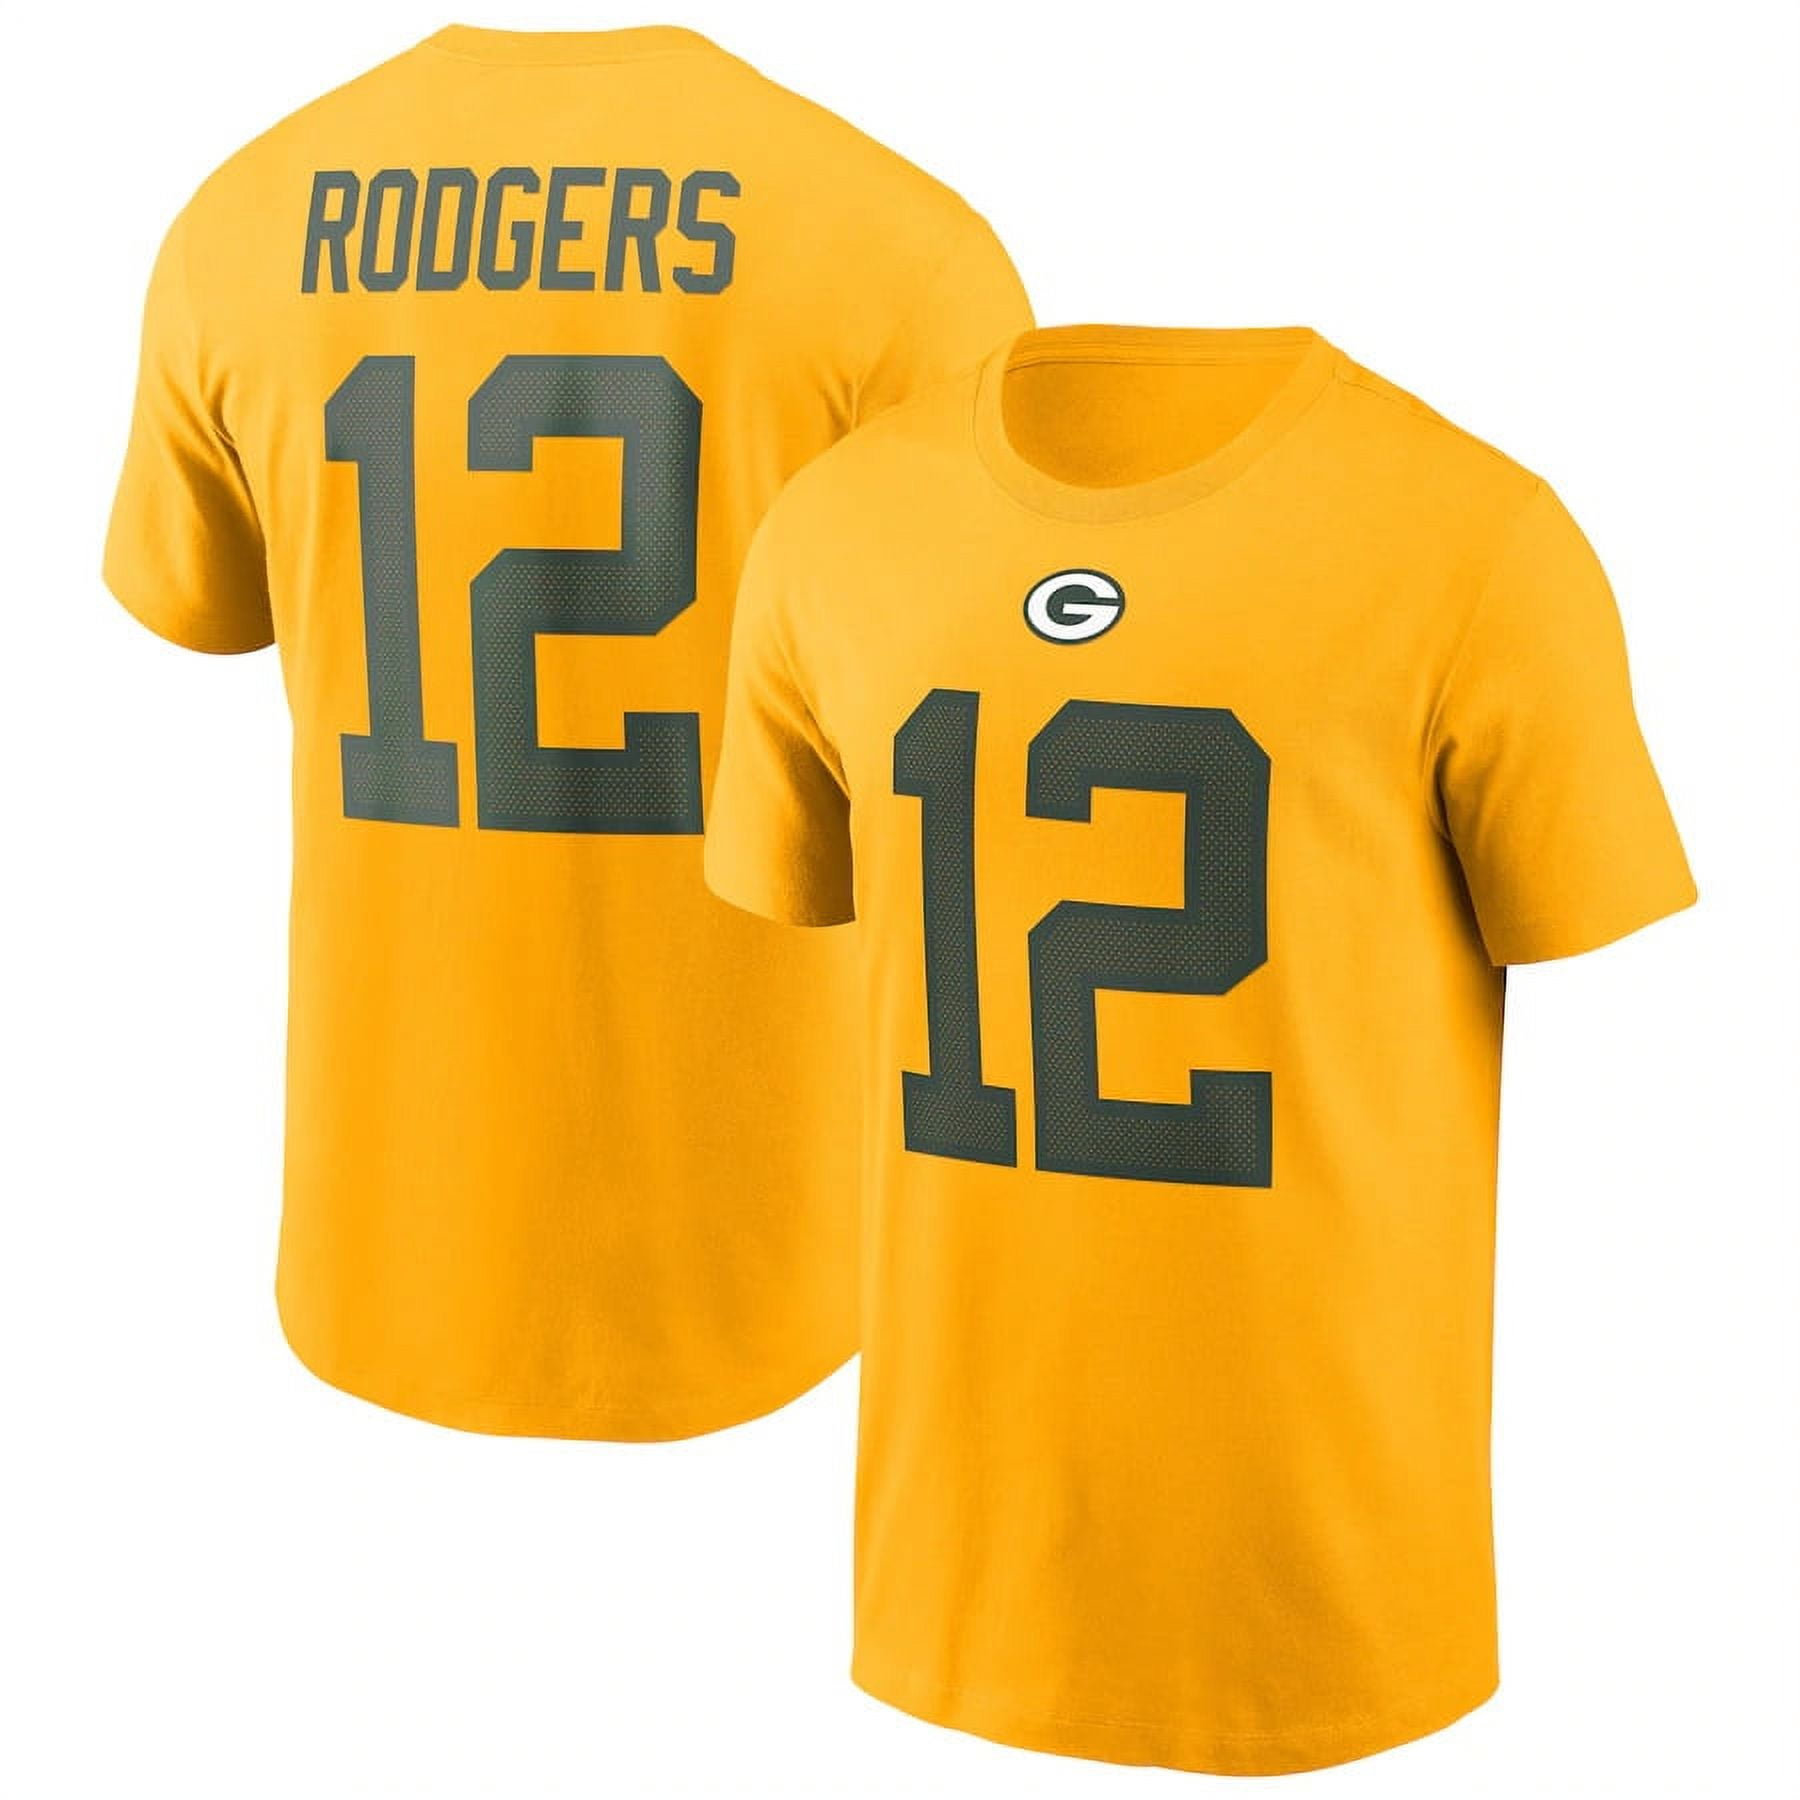  NFL Youth 8-20 Team Color Alternate Dri-Fit Cotton Pride Player  Name and Number Jersey T-Shirt : Sports & Outdoors